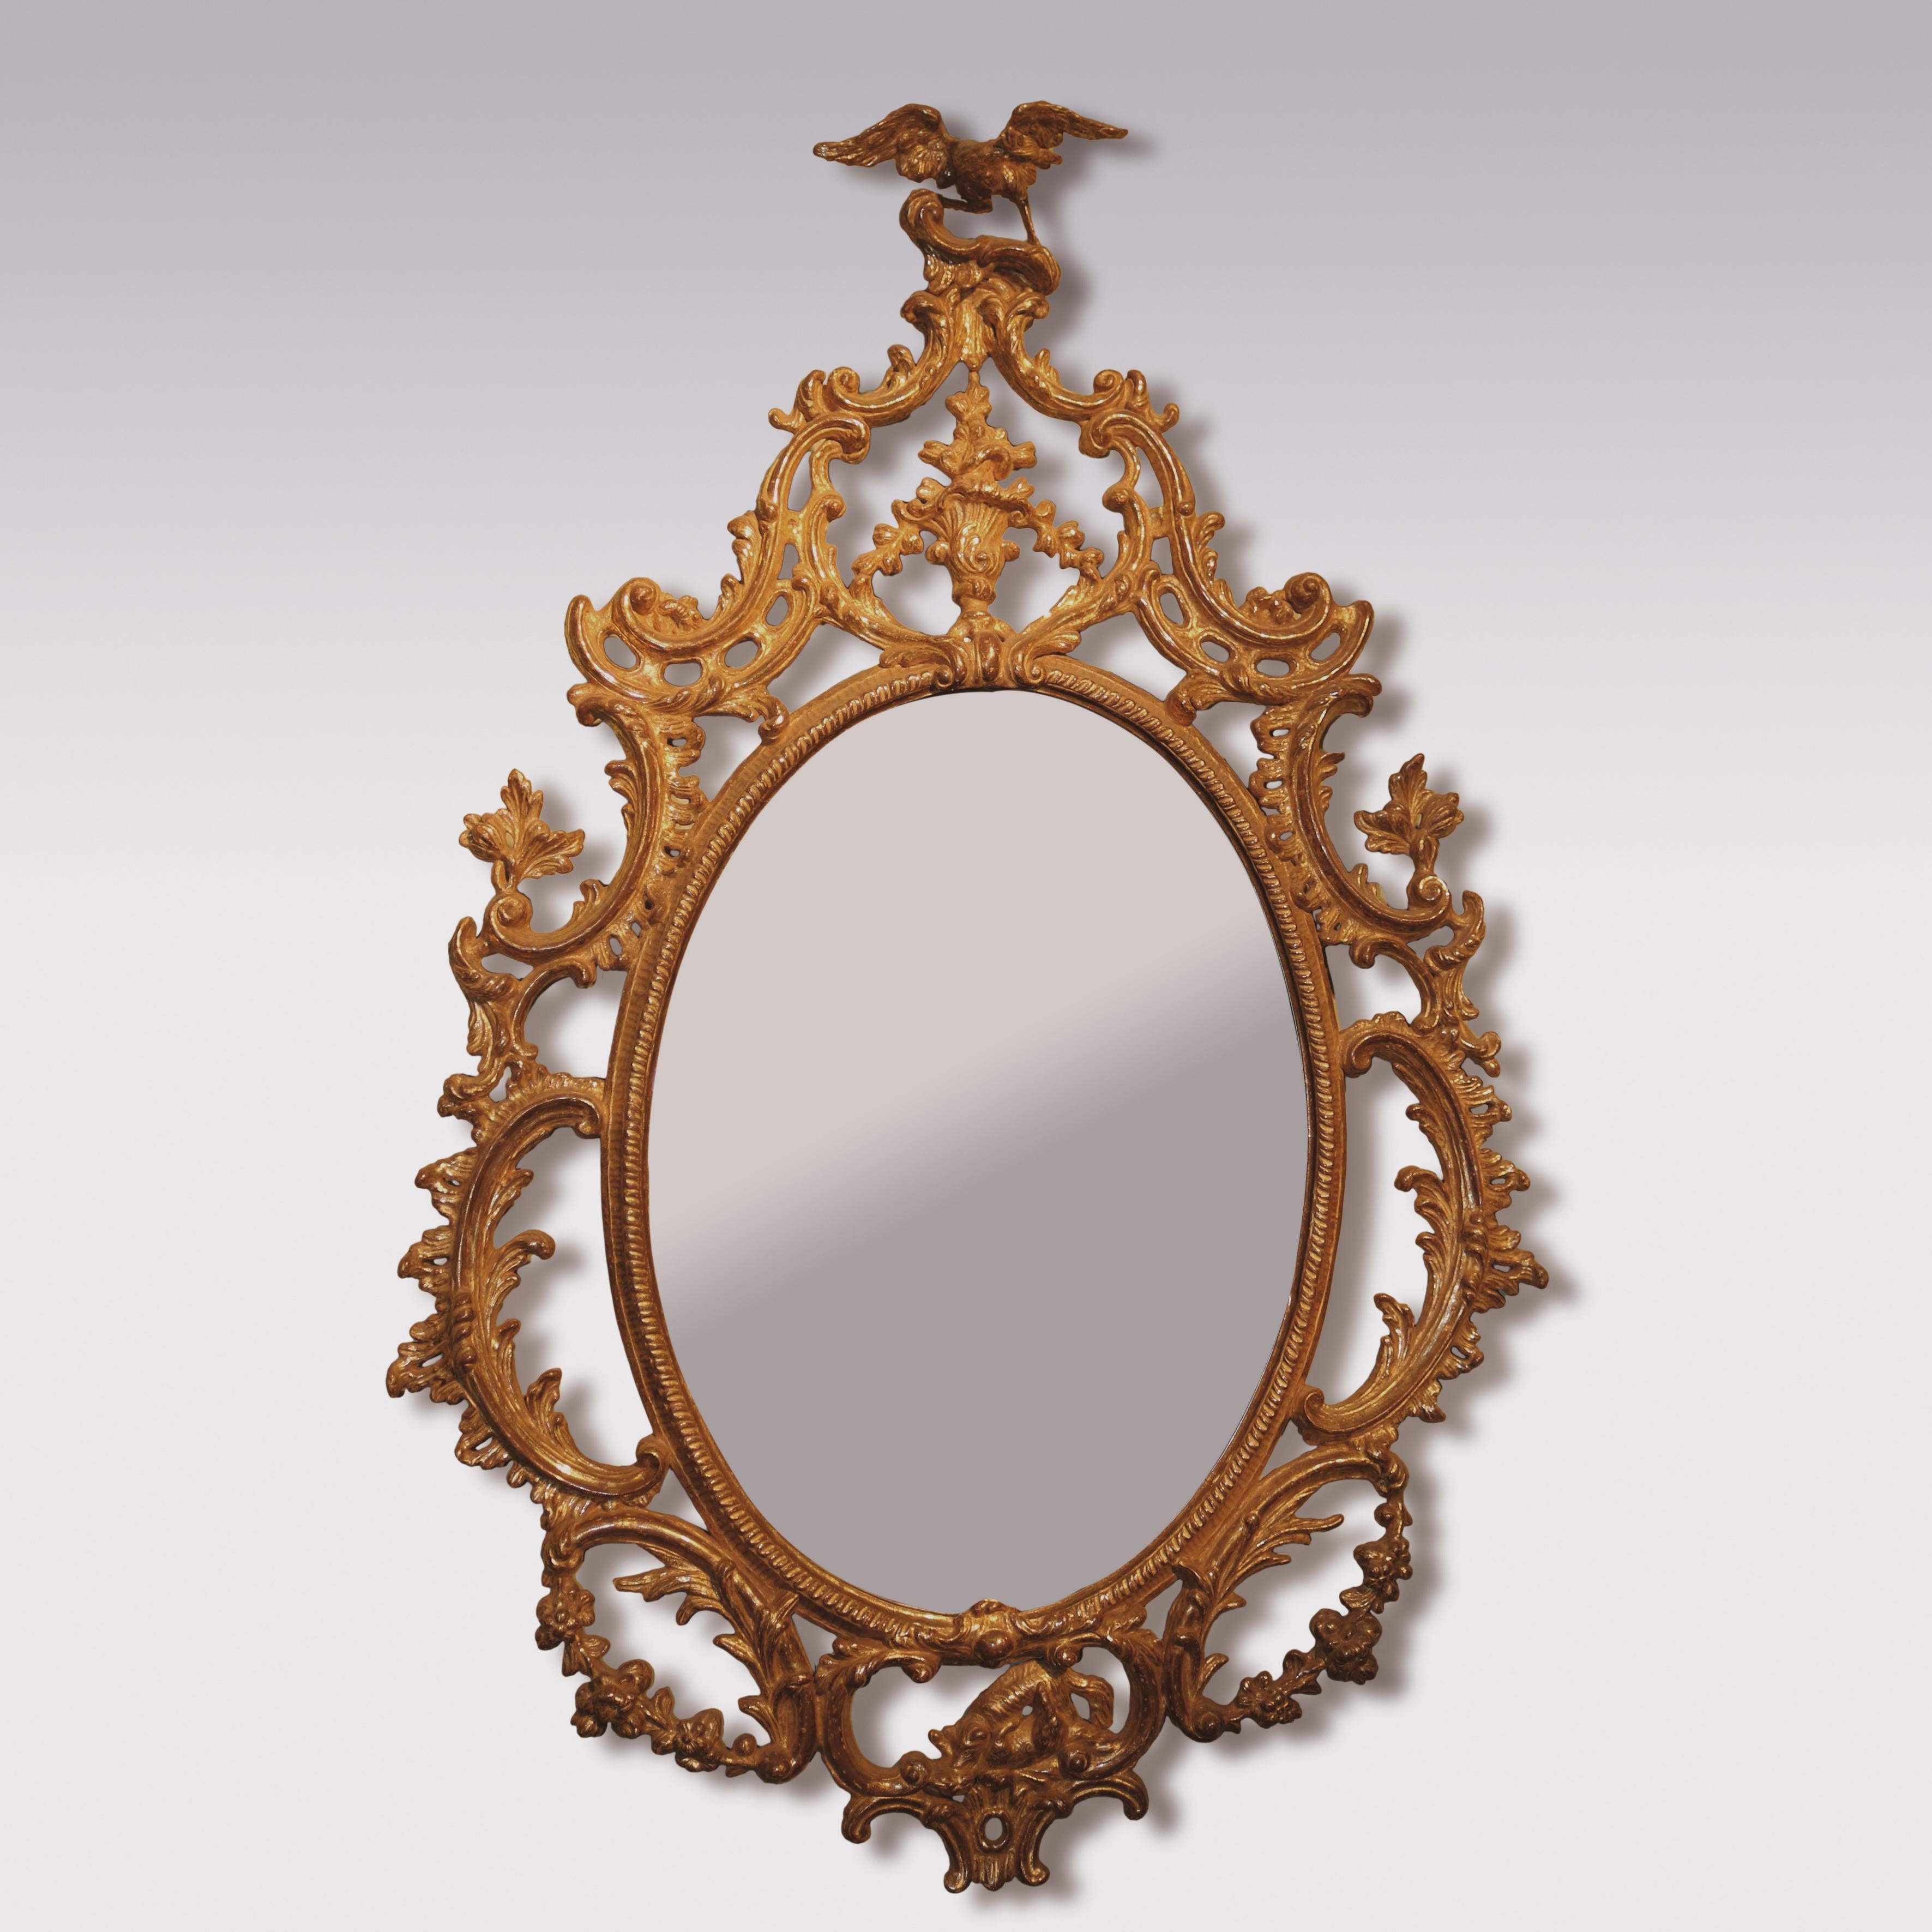 English 18th Century Chippendale Giltwood Mirrors